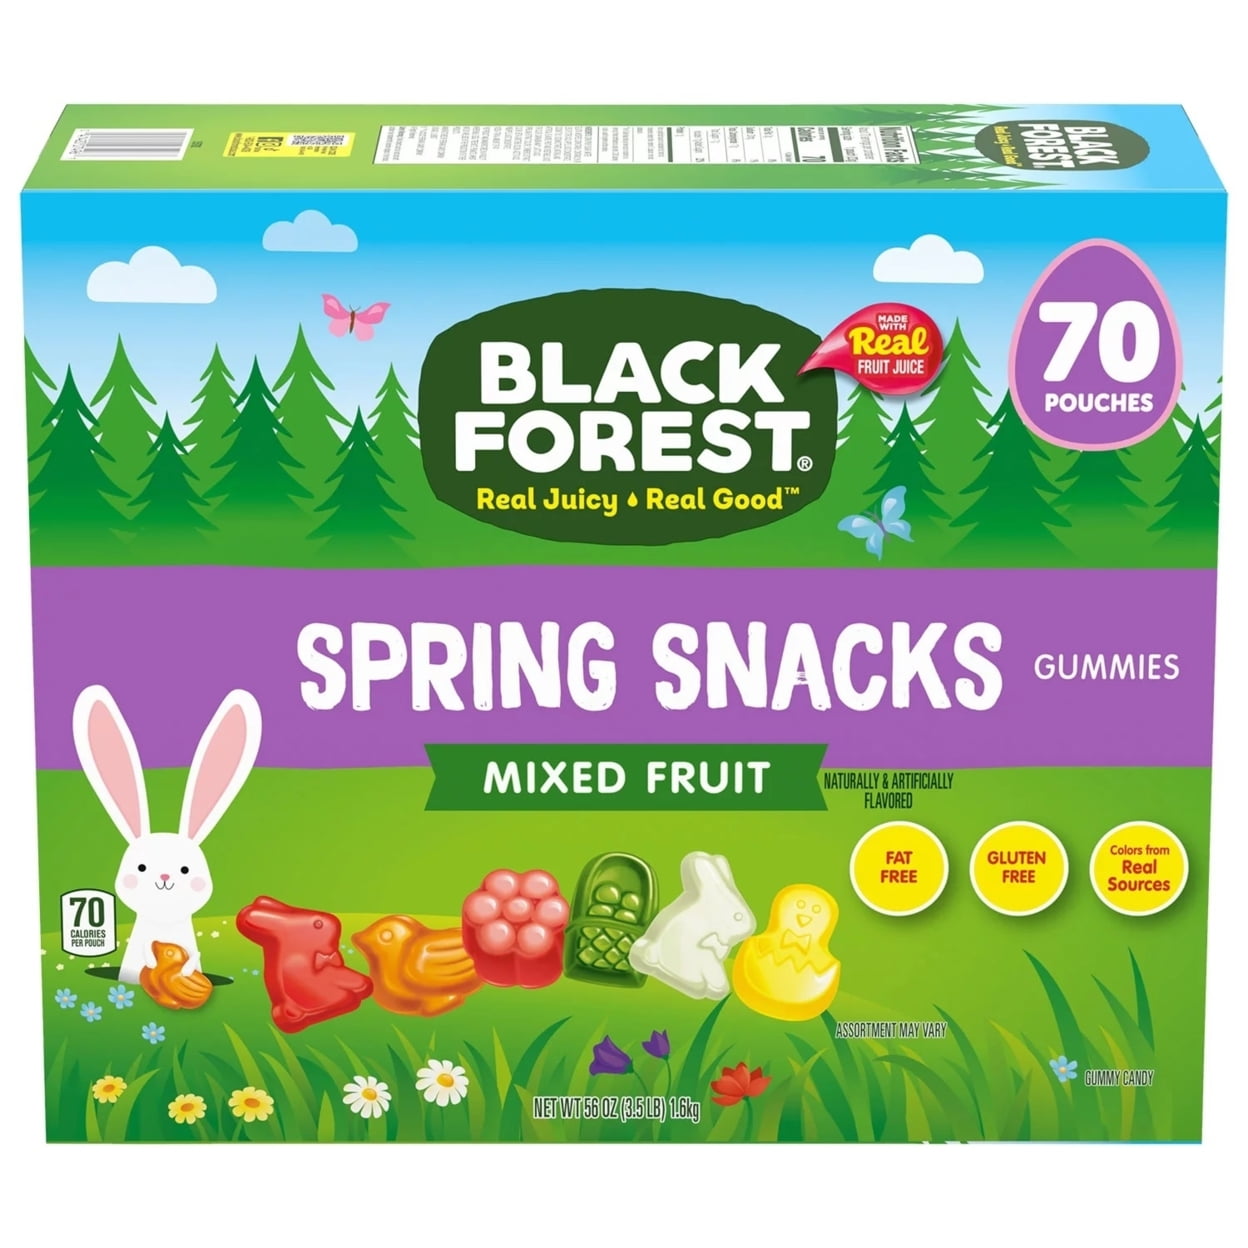 Black Forest Spring Snacks Gummies (70 Count)